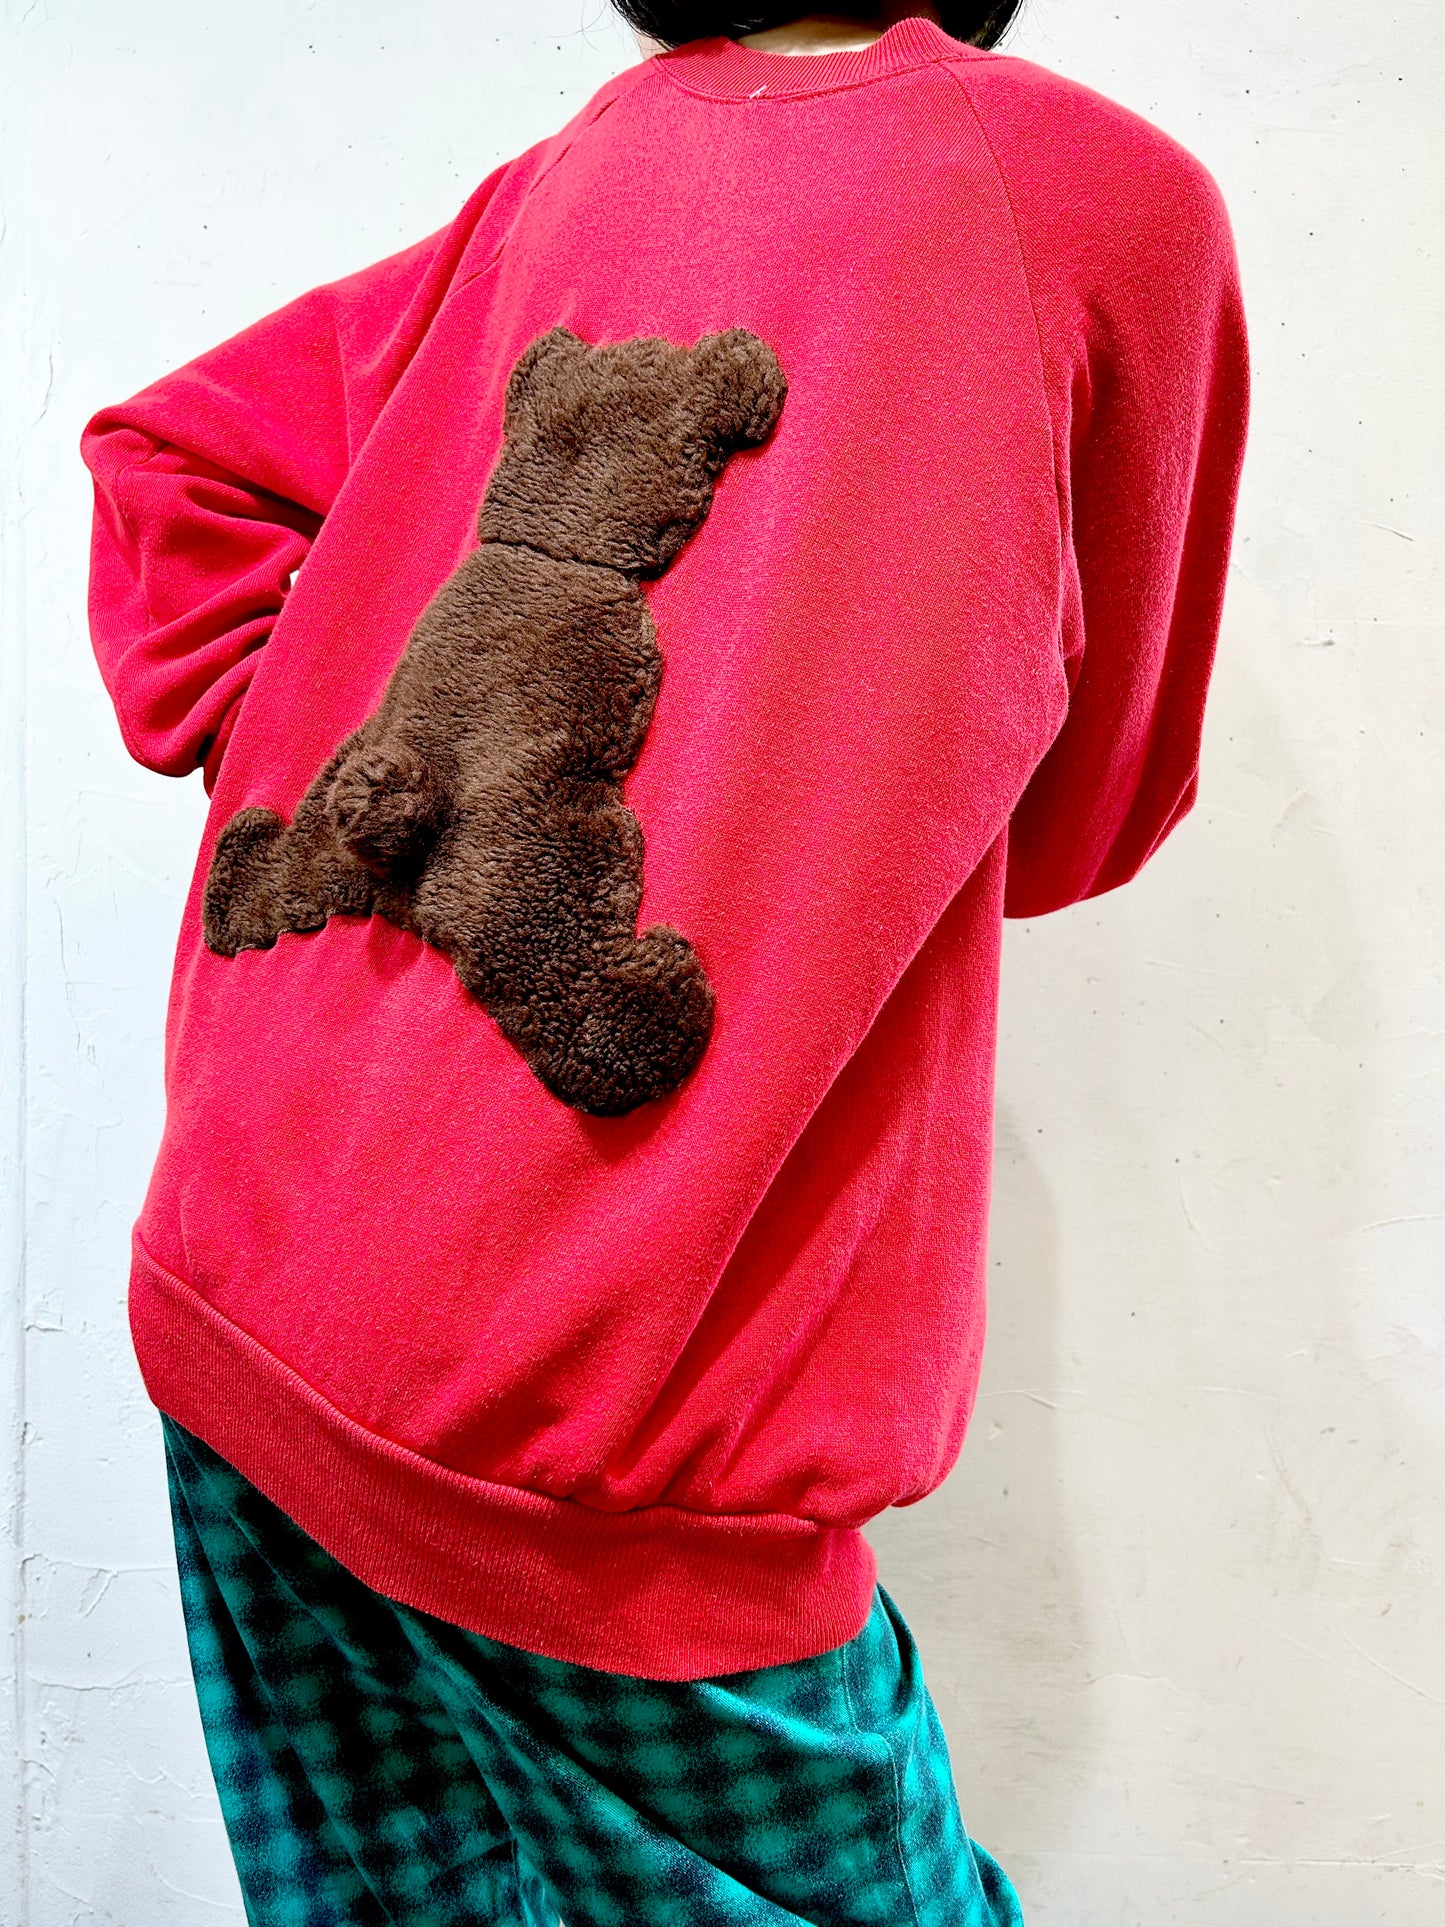 Vintage Teddy Bear Patch Sweat MADE IN USA [I25060]